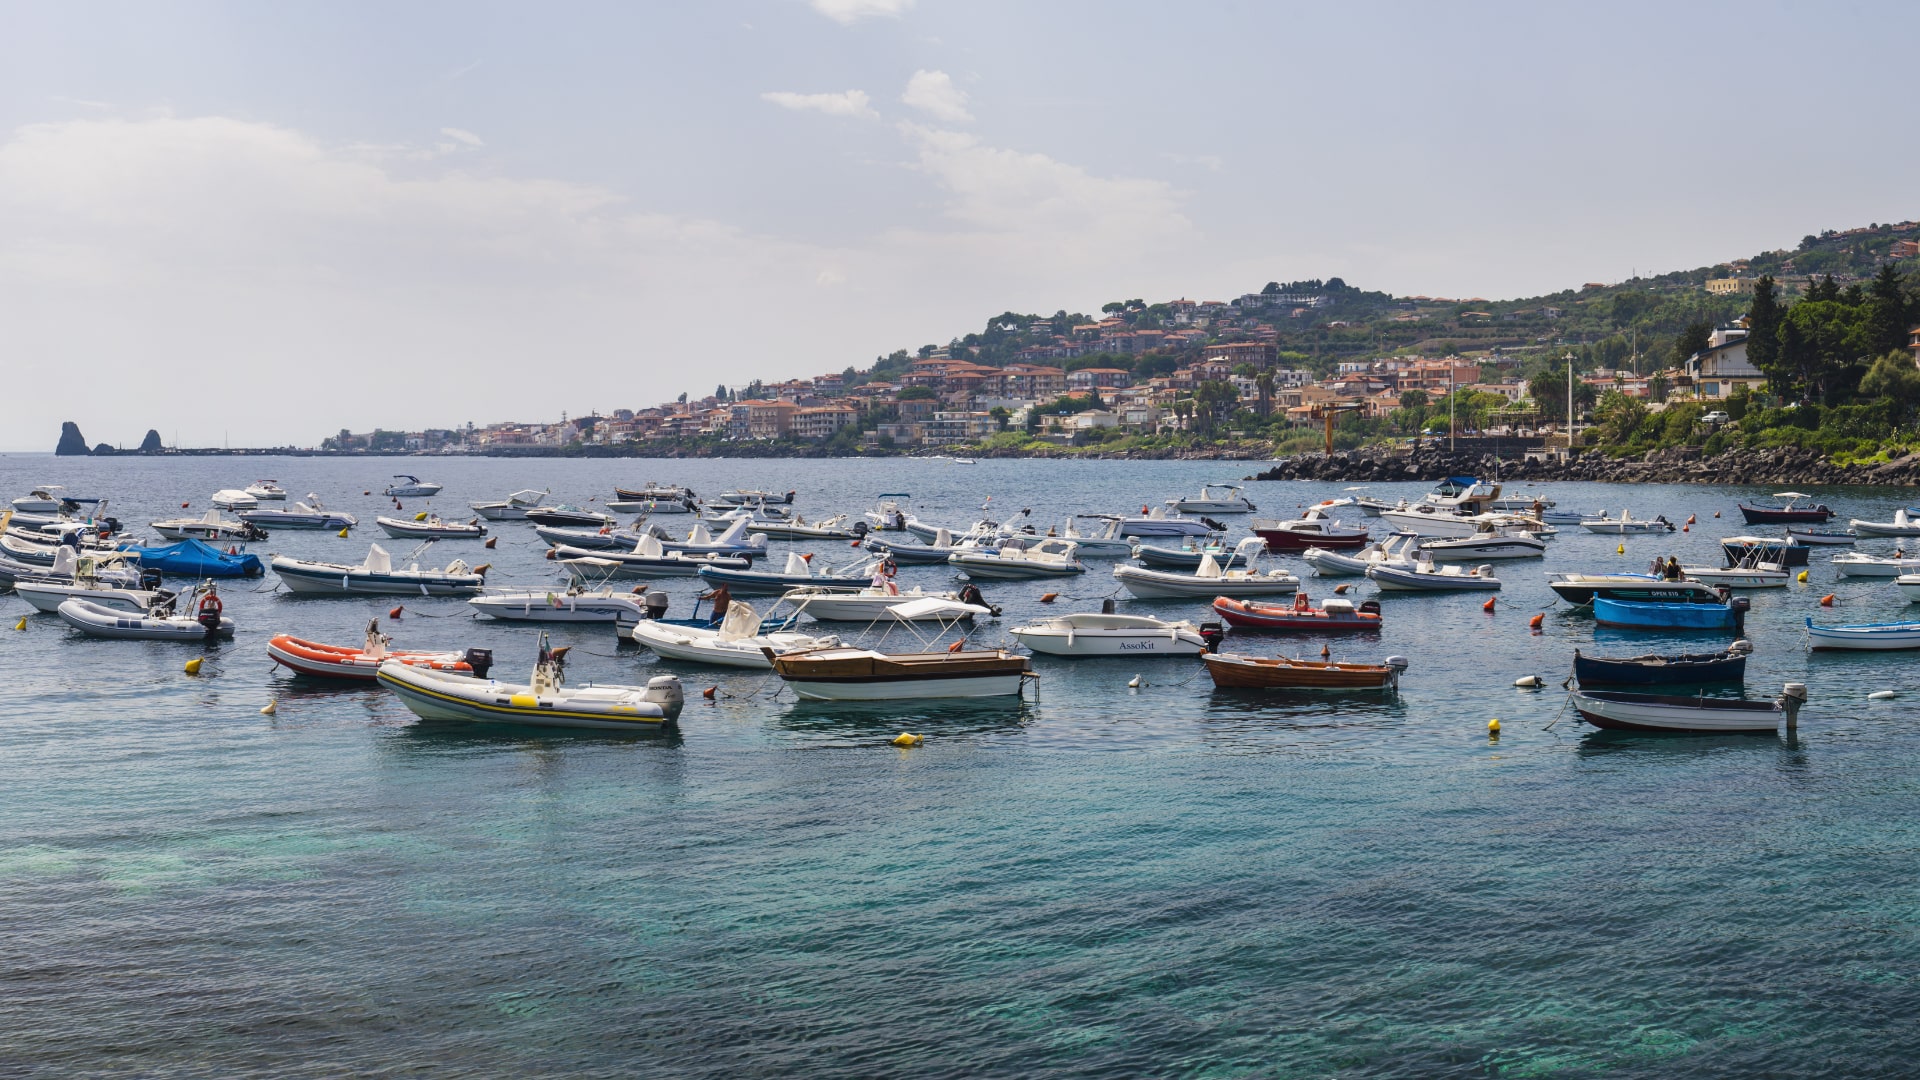 panoramic-photo-of-boats-in-the-harbour-at-aci-tre-2022-03-09-16-33-21-utc-min